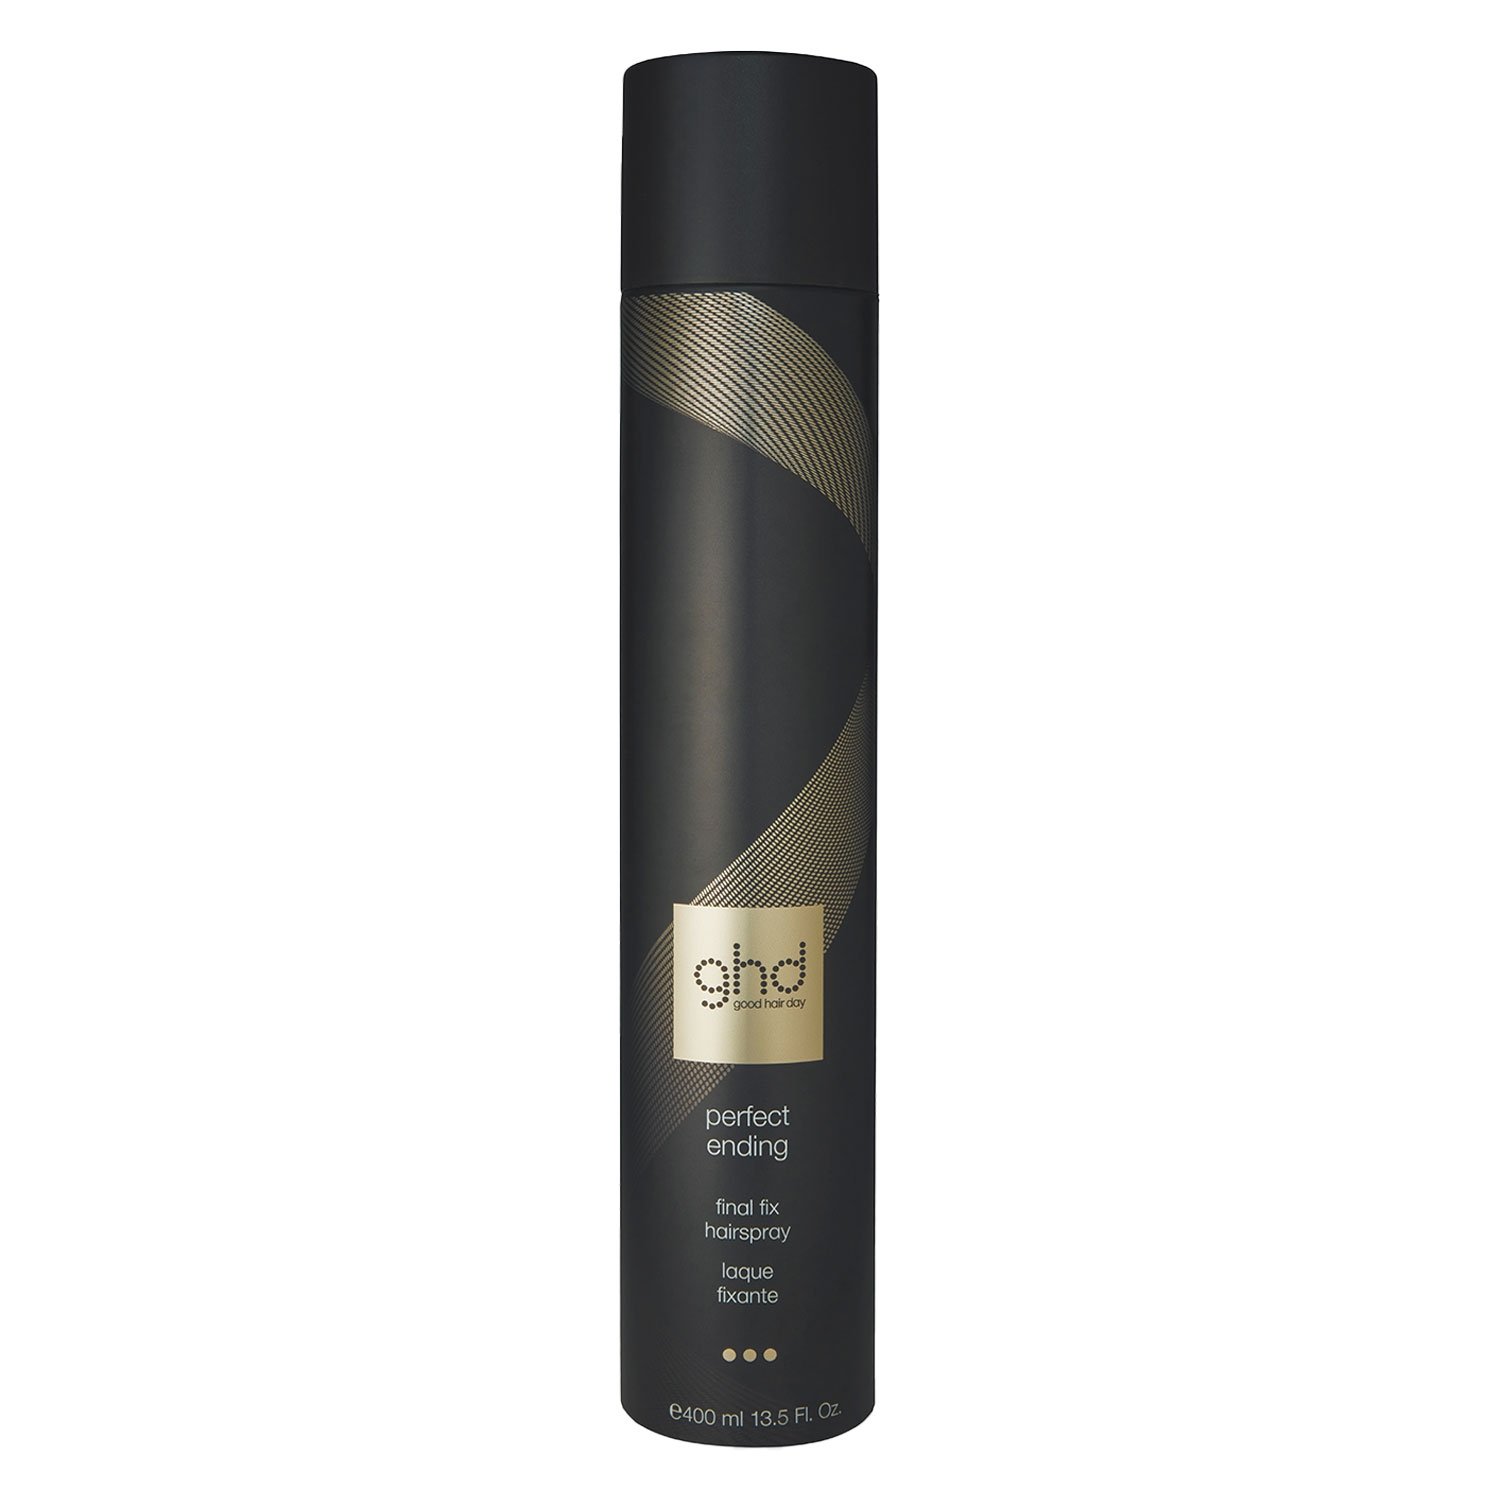 Produktbild von ghd Heat Protection Styling System - Perfect Ending Final Fix Hairspray